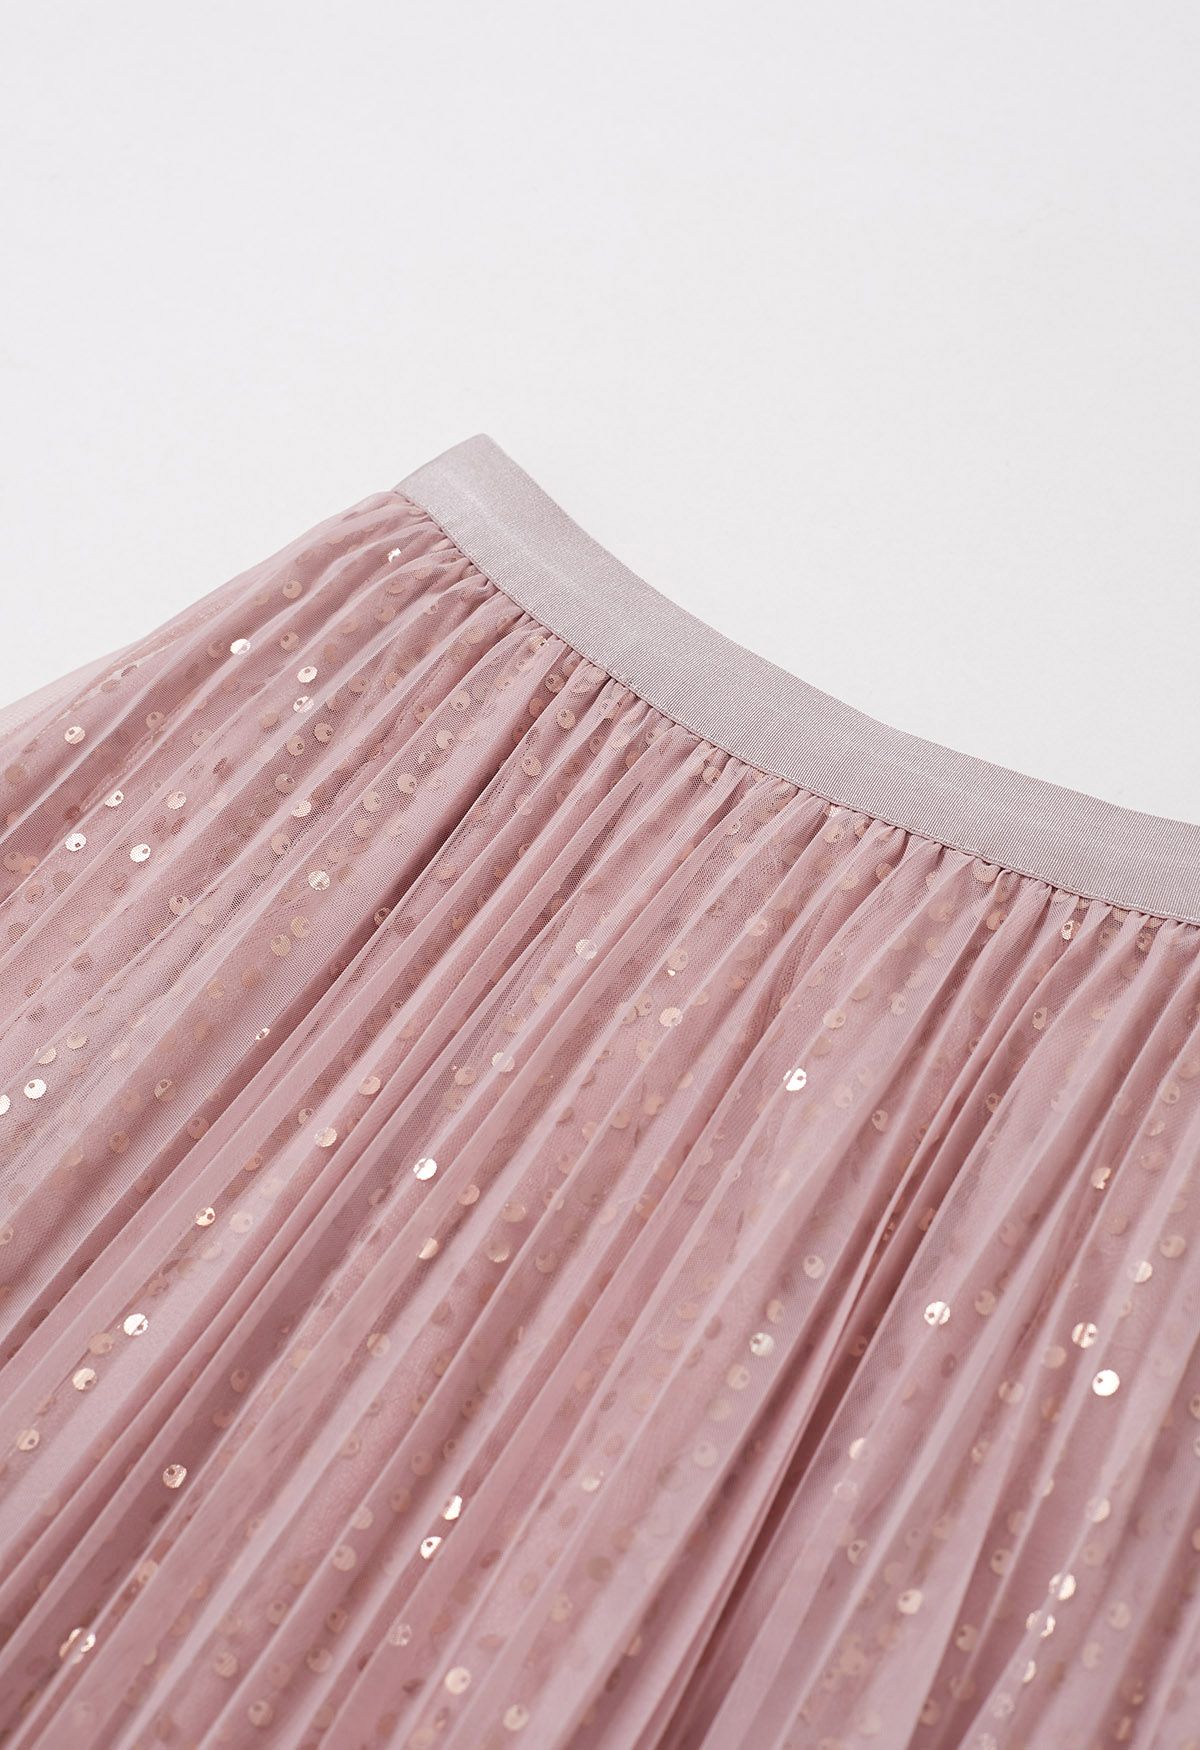 Glister Sequin Trim Mesh Tulle Maxi Skirt in Pink